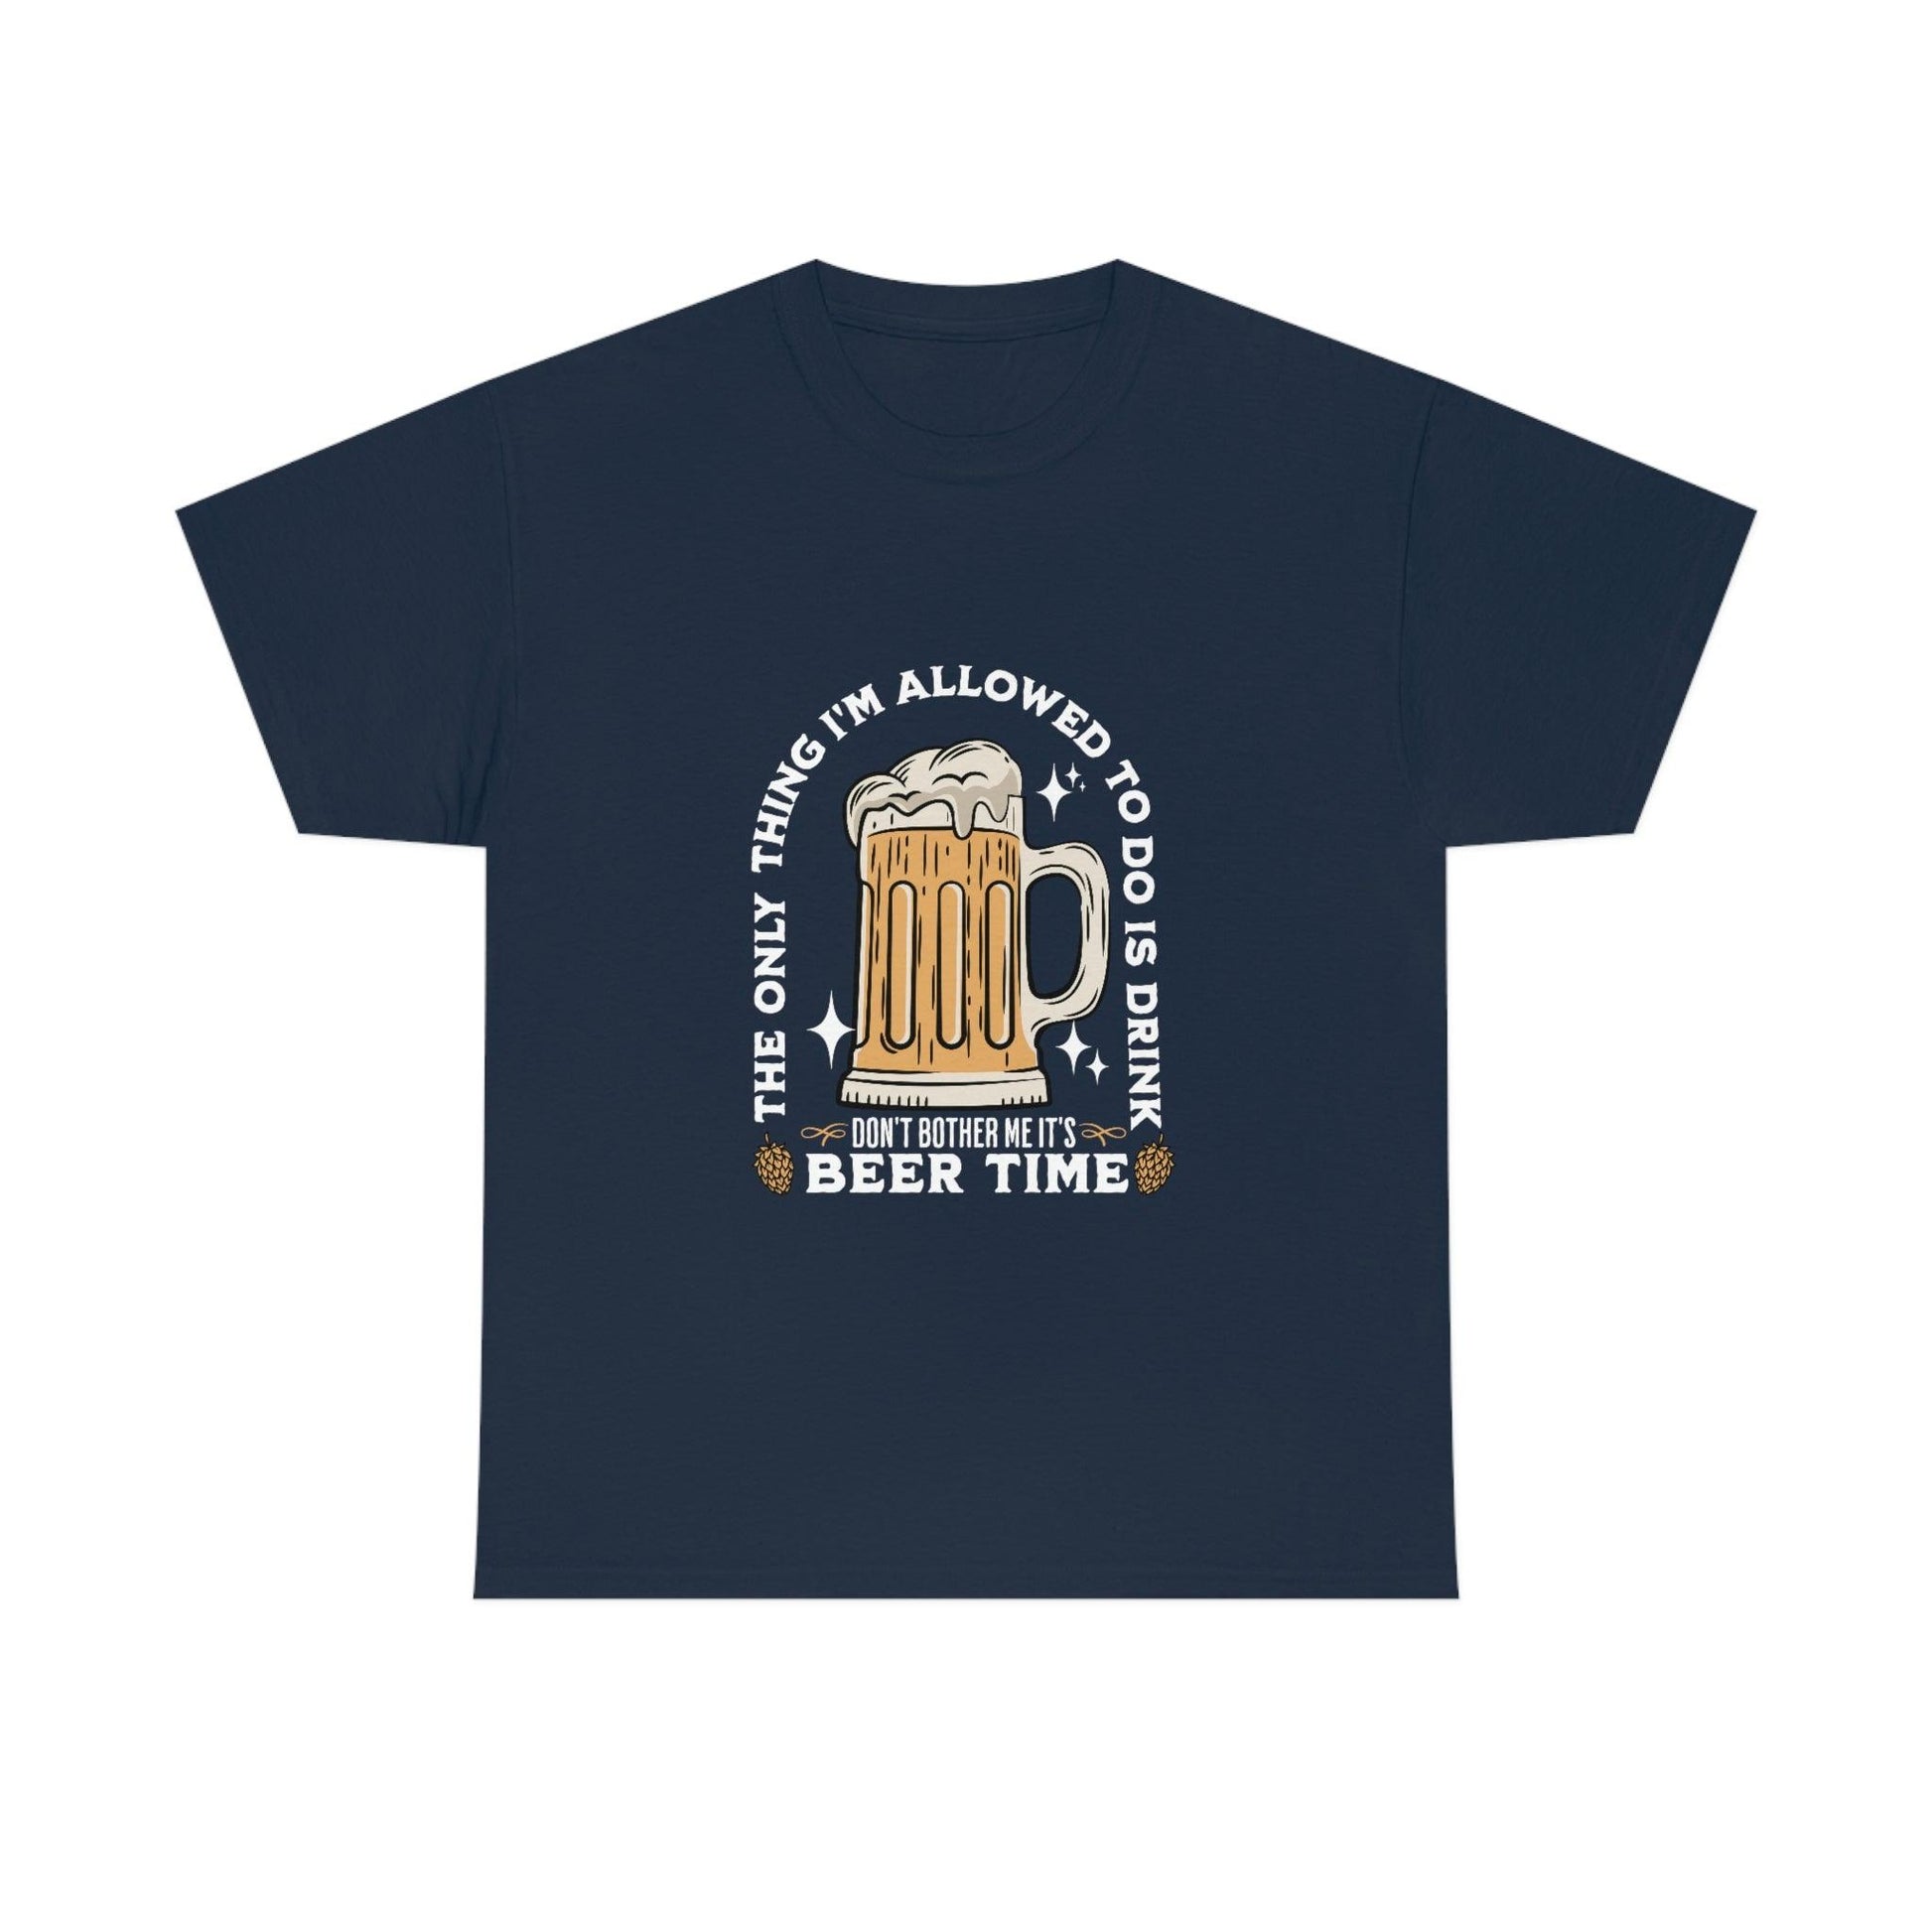 The only thing I am allowed to do is Drink - Beer Time Cotton Tee - Giftsmojo